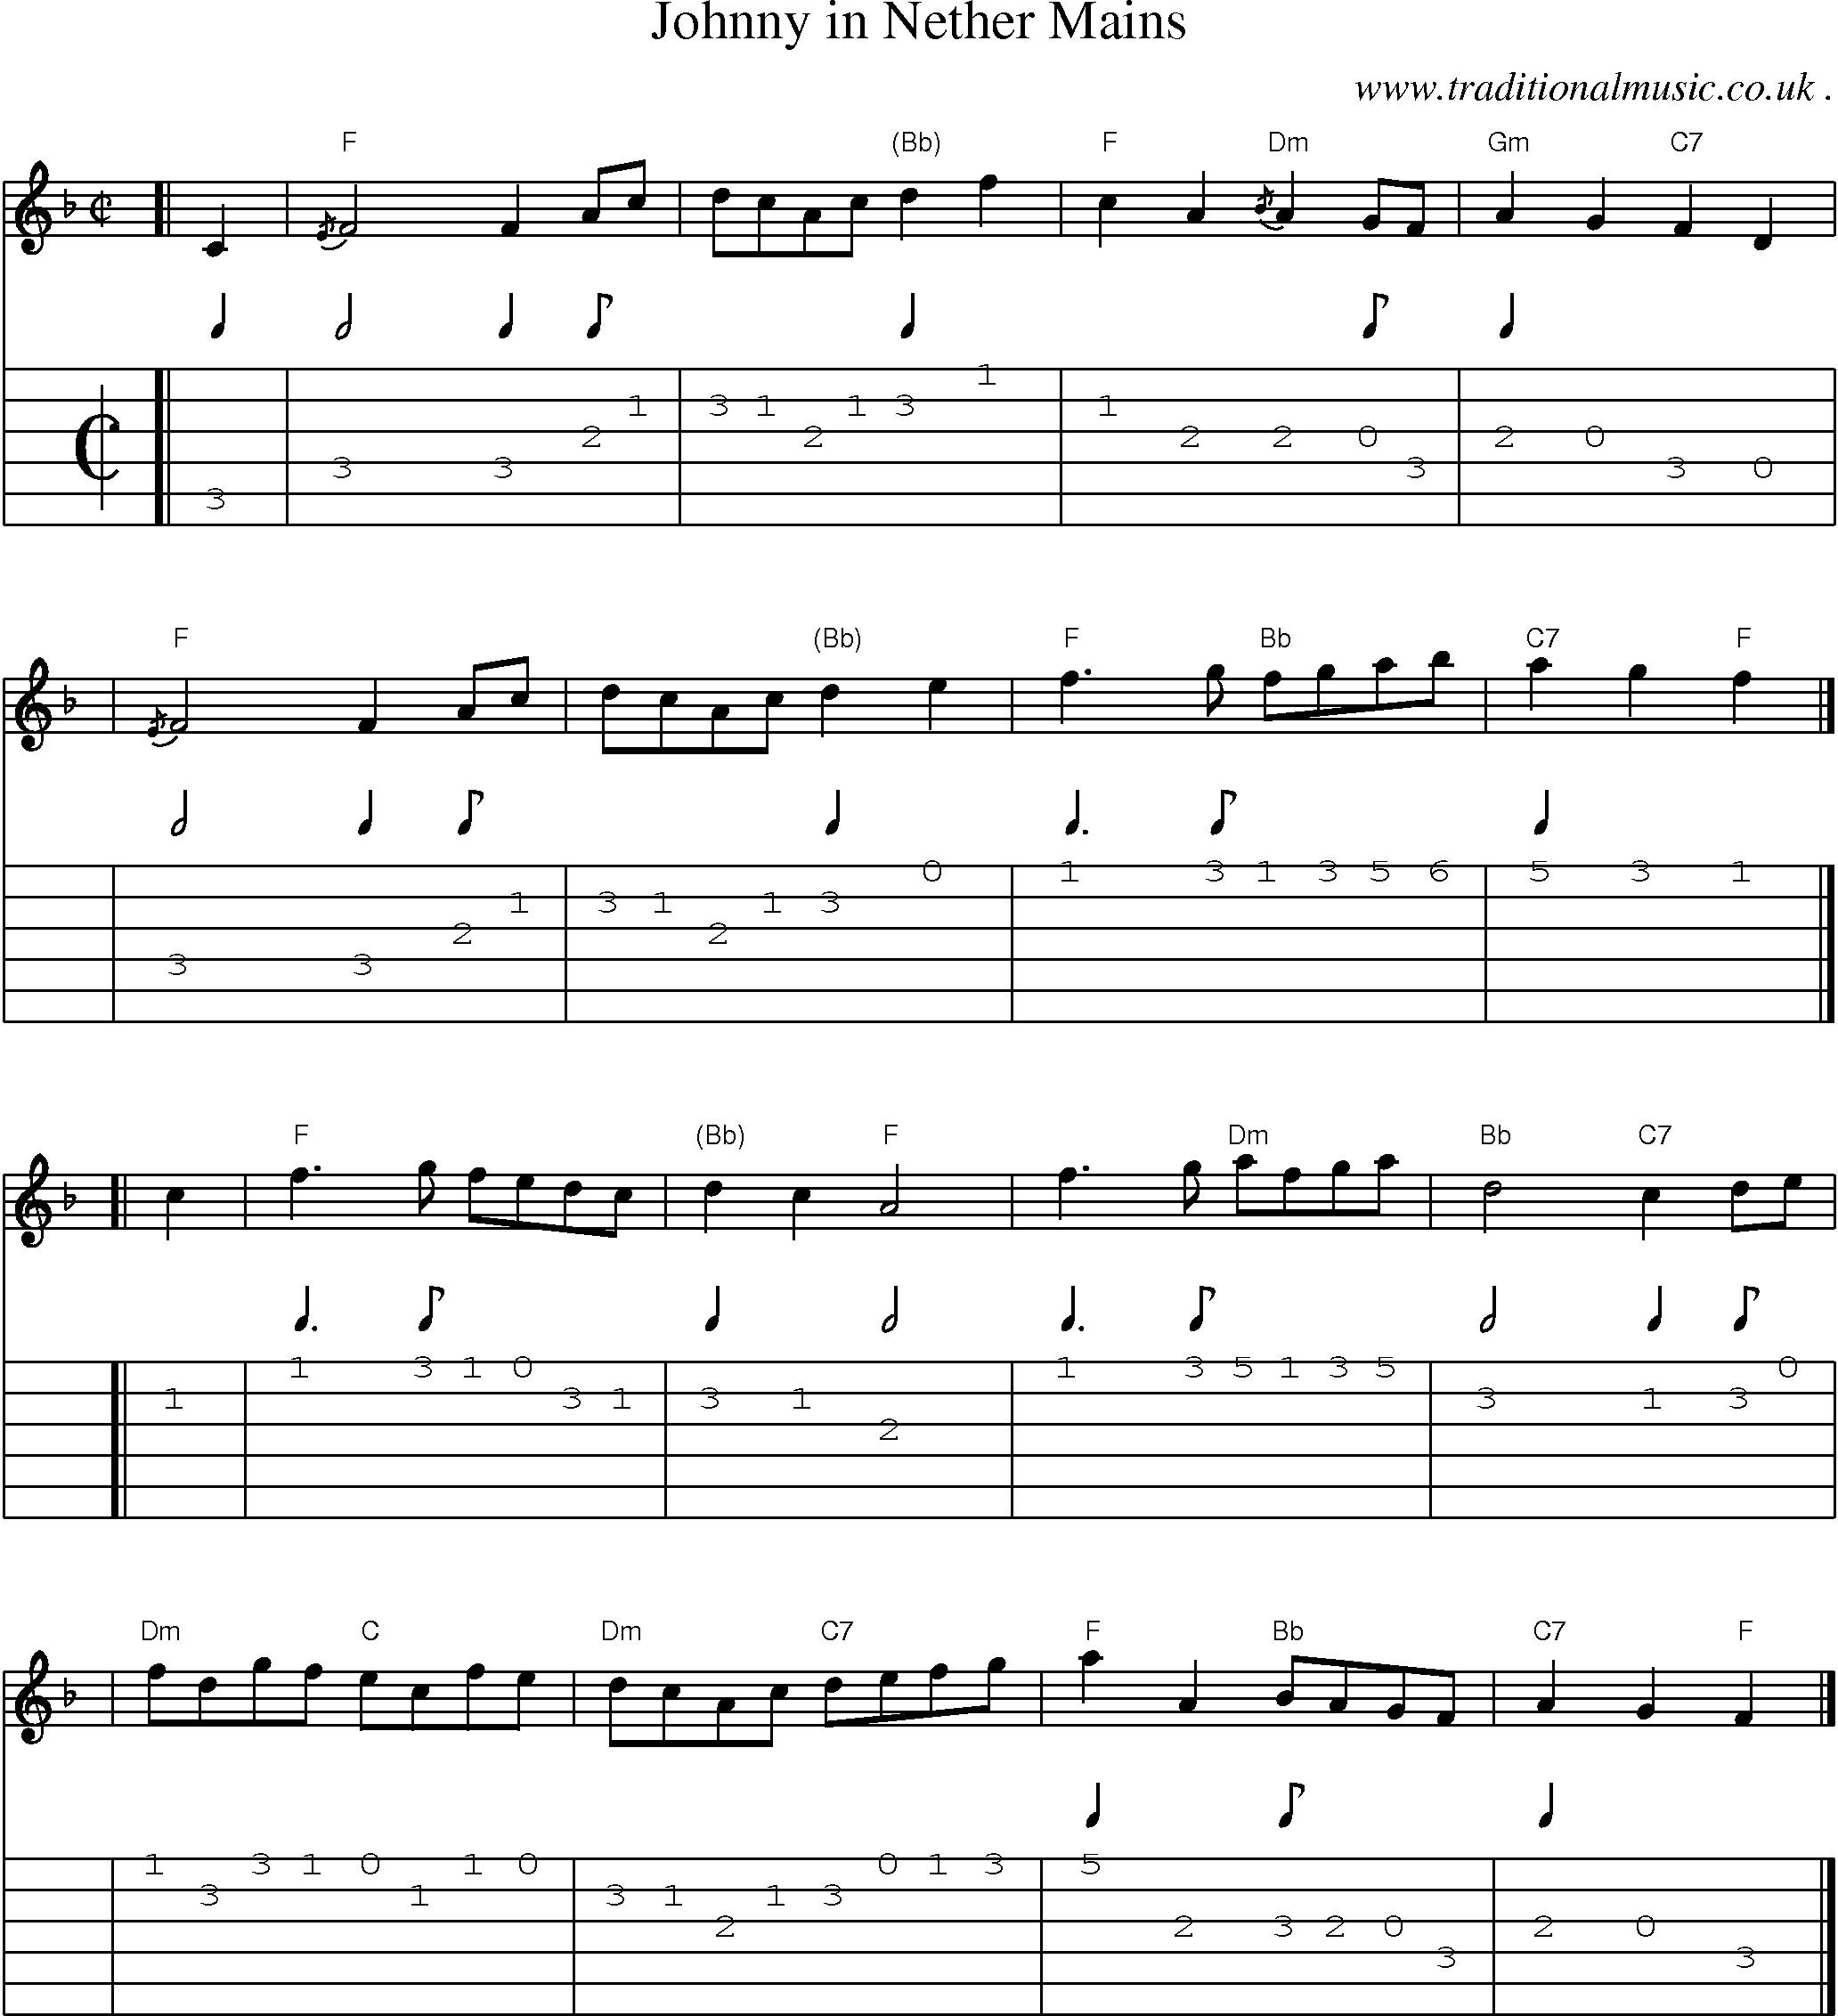 Sheet-music  score, Chords and Guitar Tabs for Johnny In Nether Mains